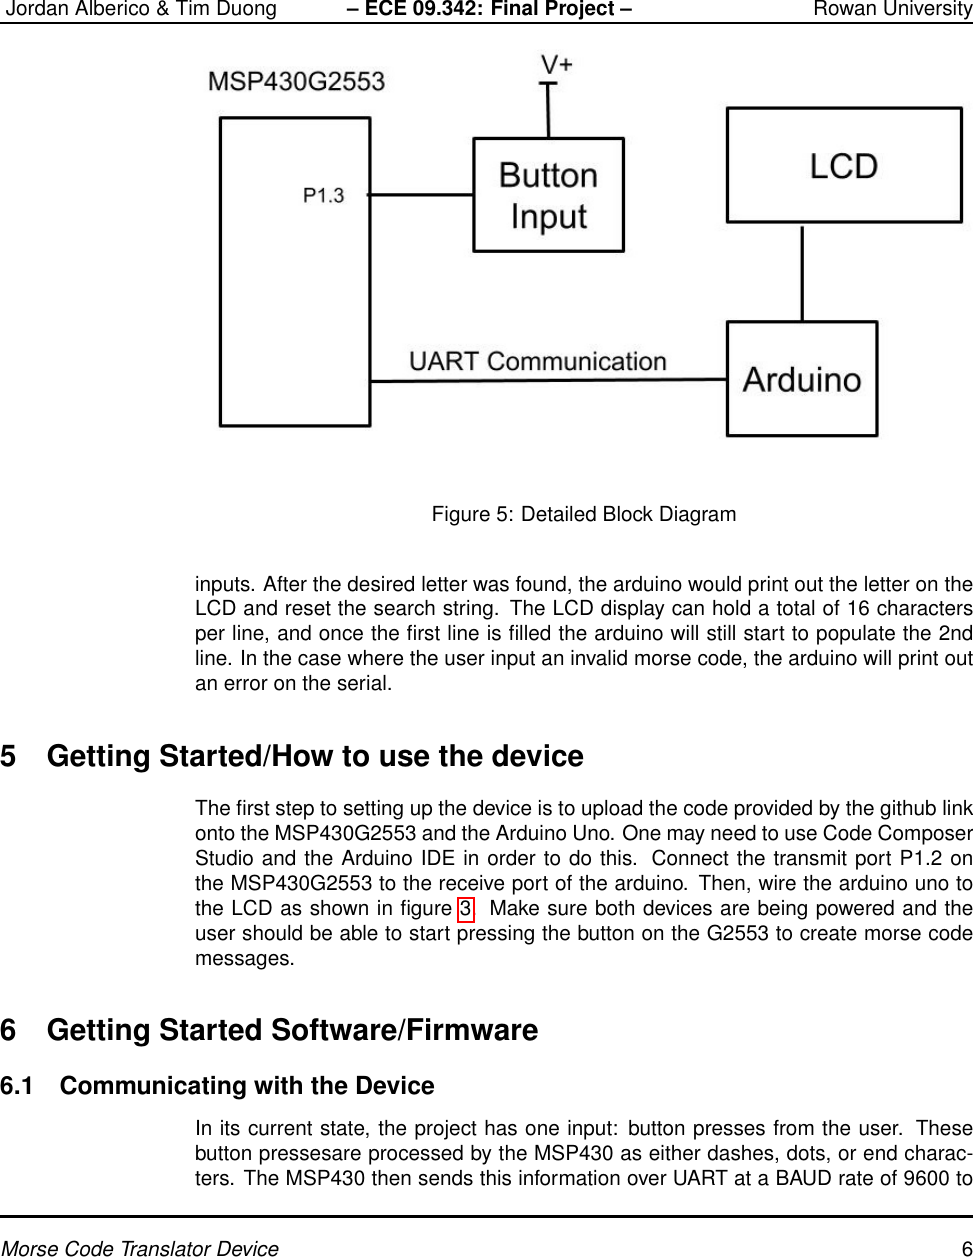 Page 6 of 7 - Morse Code Device User Guide